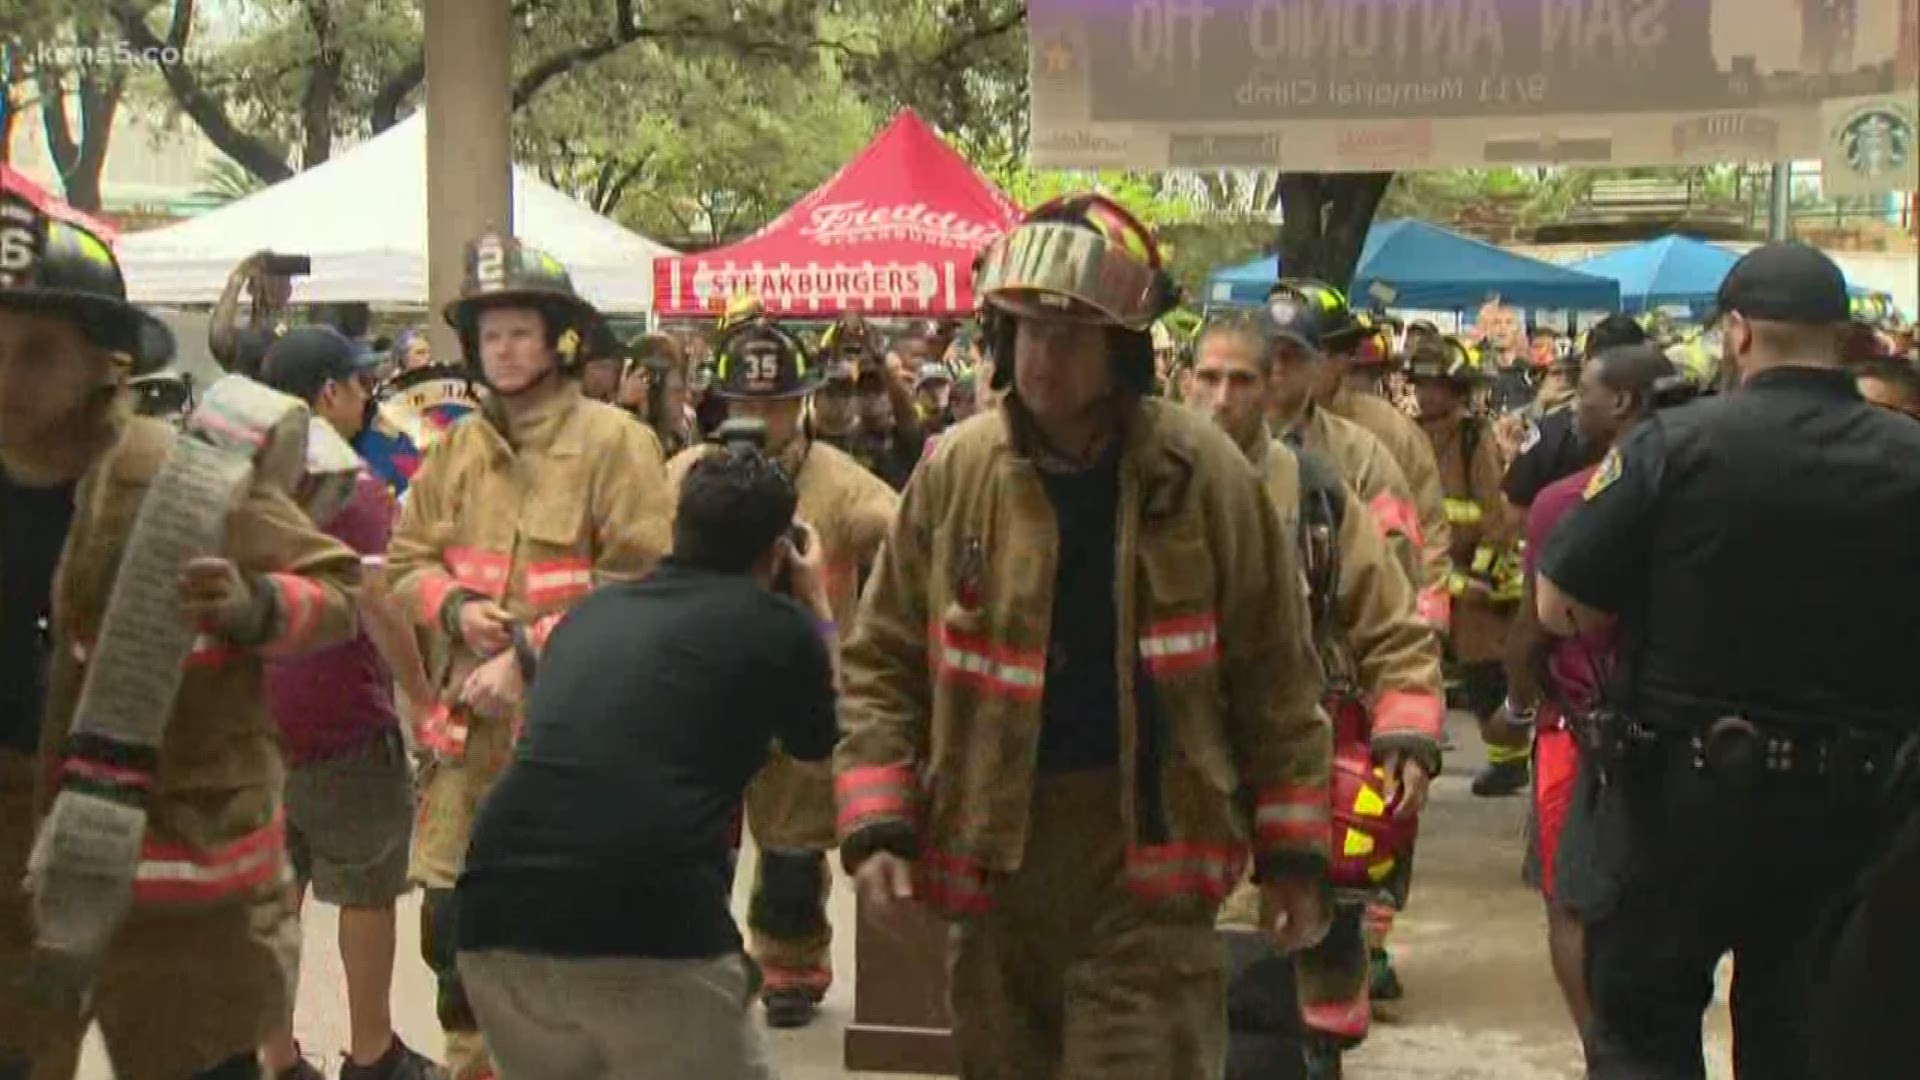 A tower climb in San Antonio Wednesday morning will honor 9/11 first responders.